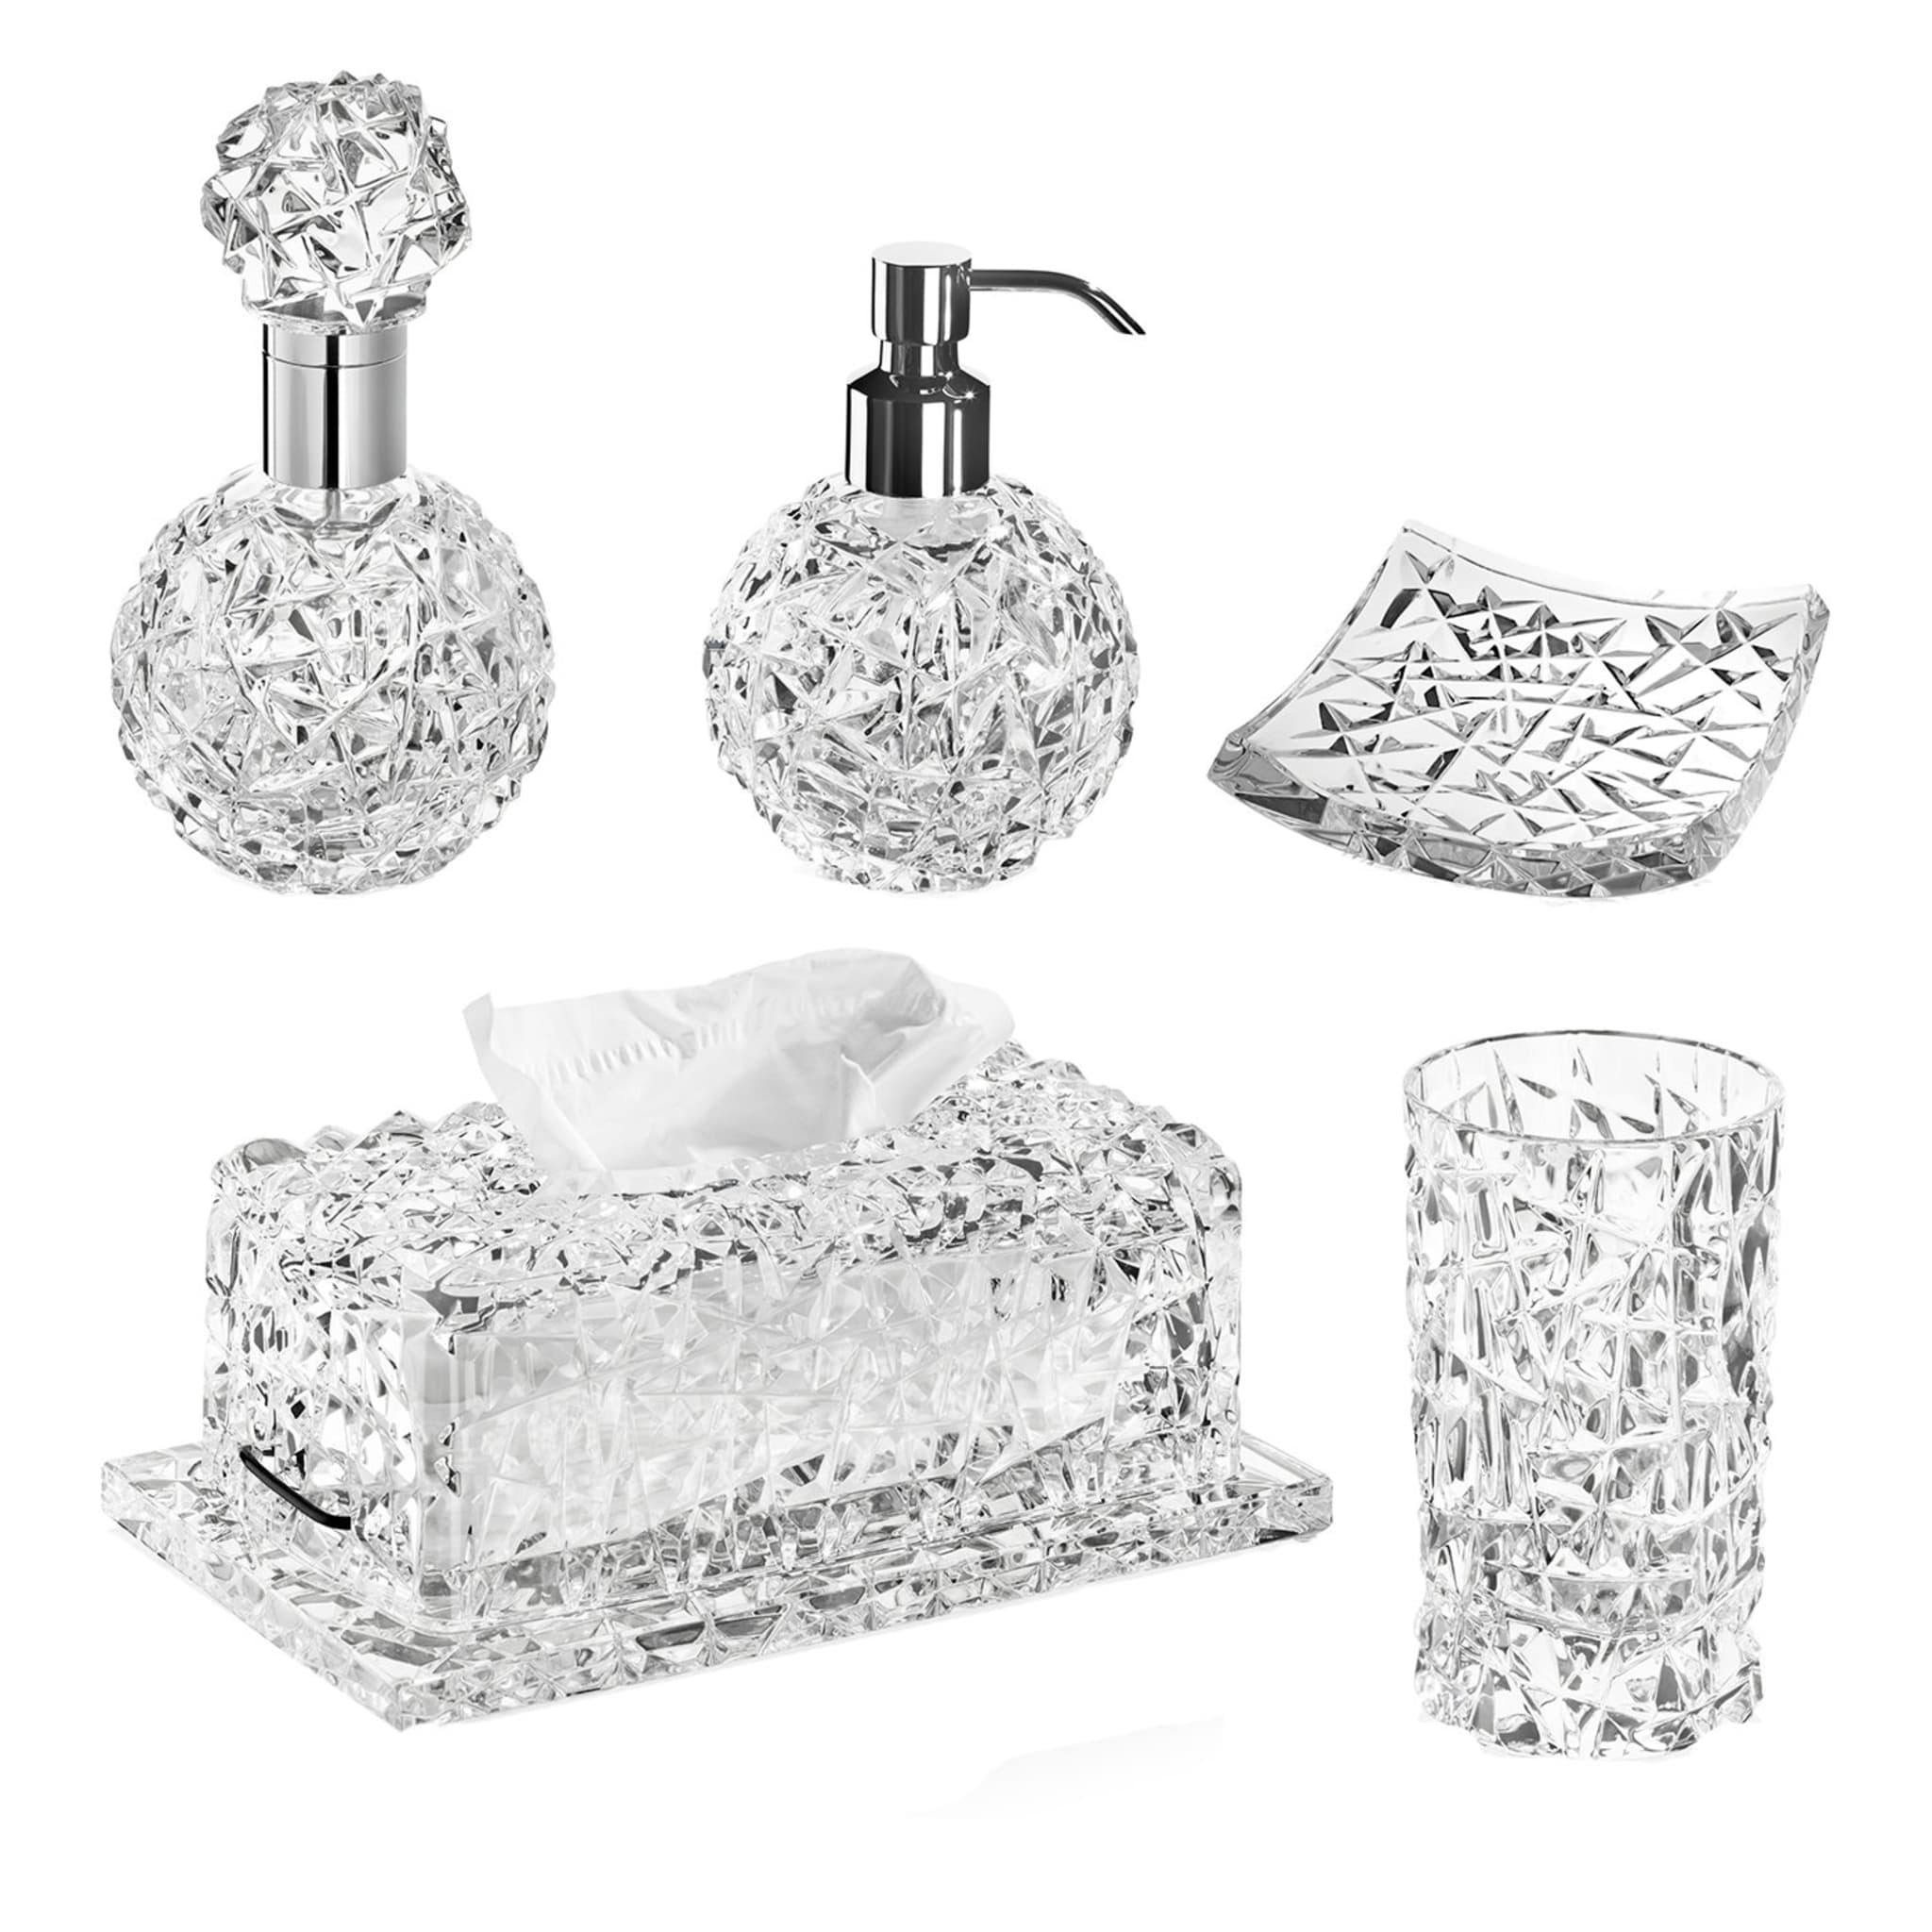 Spa Sinfonia Set of 5 Bathroom Pieces - Main view